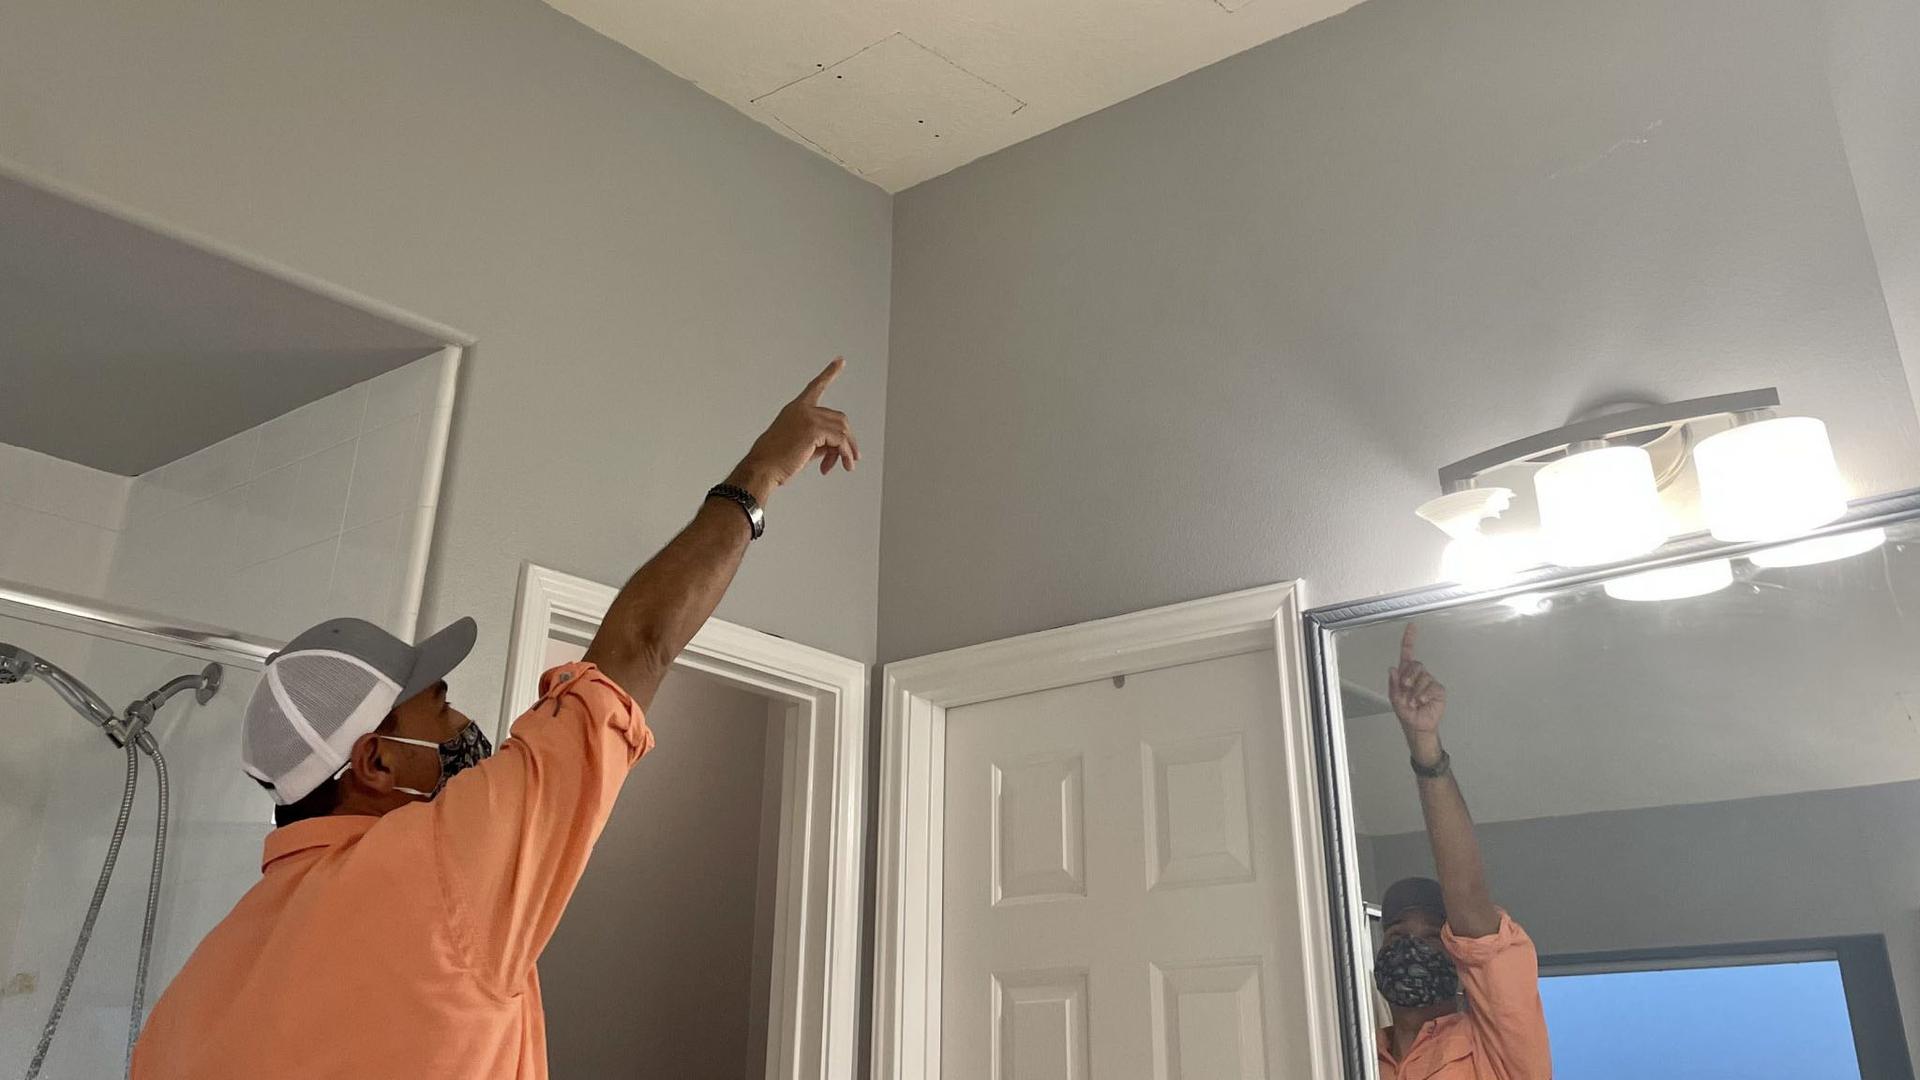 Houston plumber Eduardo Dolande said he had to cut holes in his bathroom ceiling to reach broken pipes during the Texas freeze.